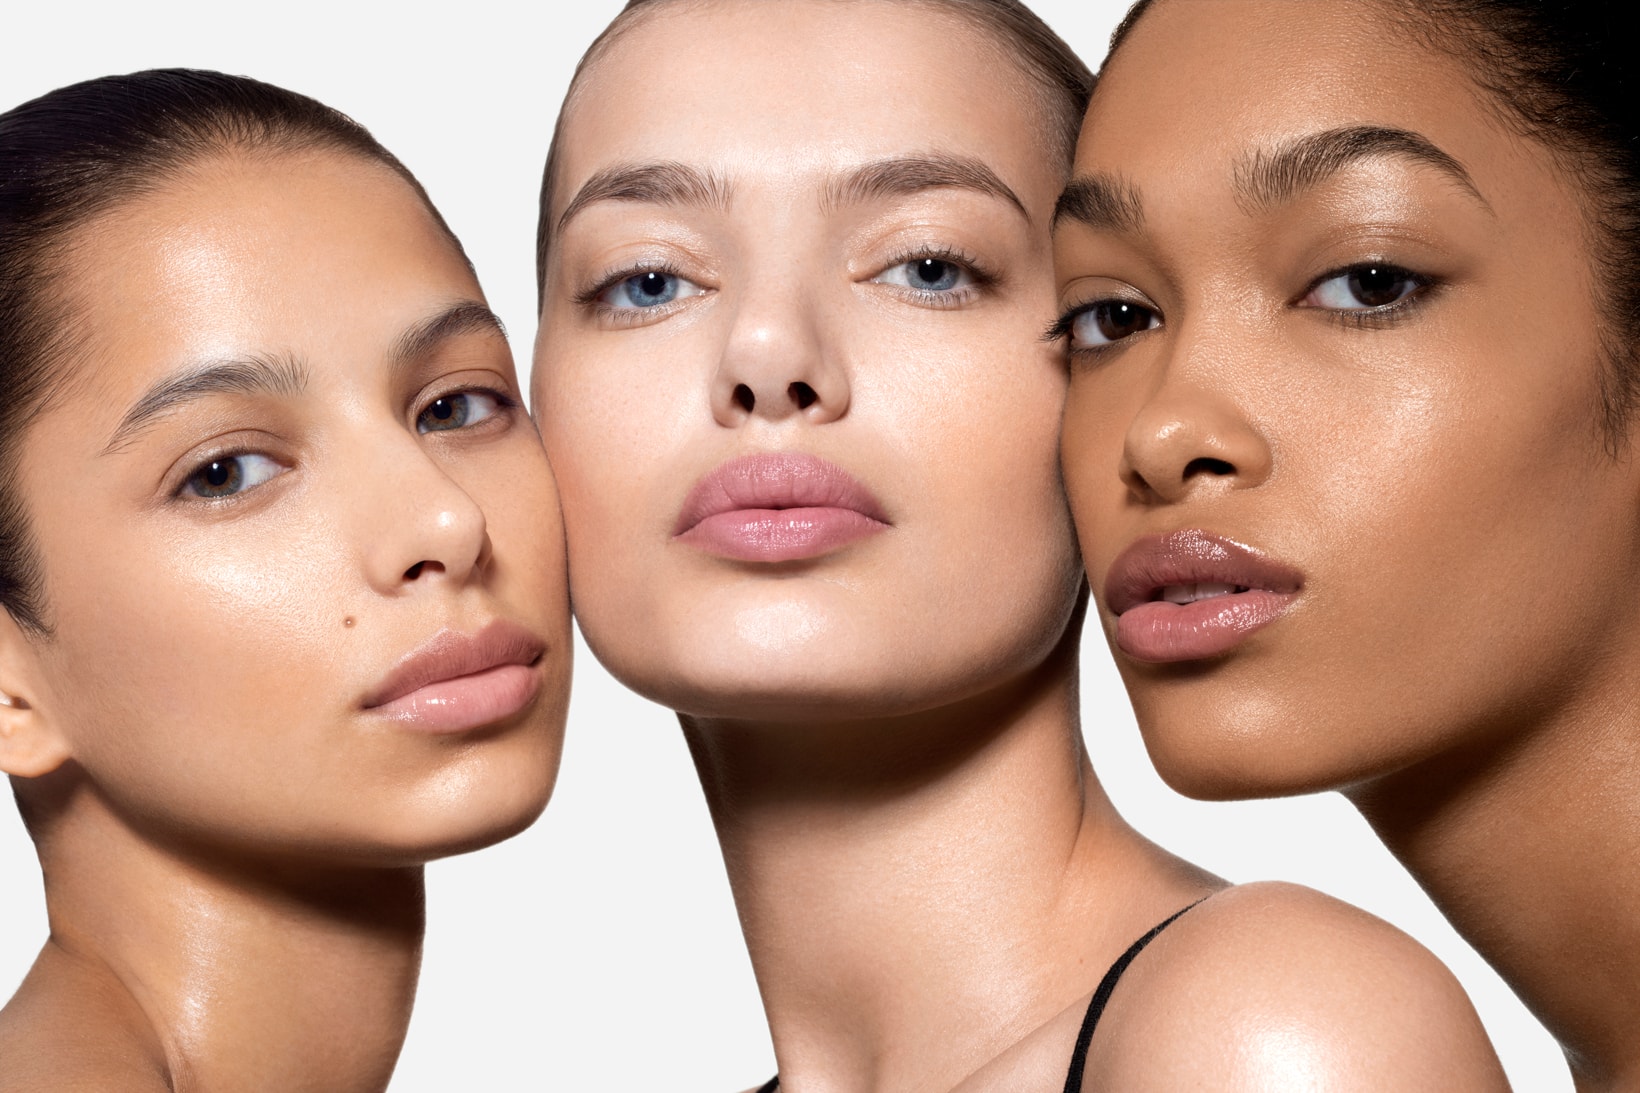 KITH x Estee Lauder Beauty Collection Campaign